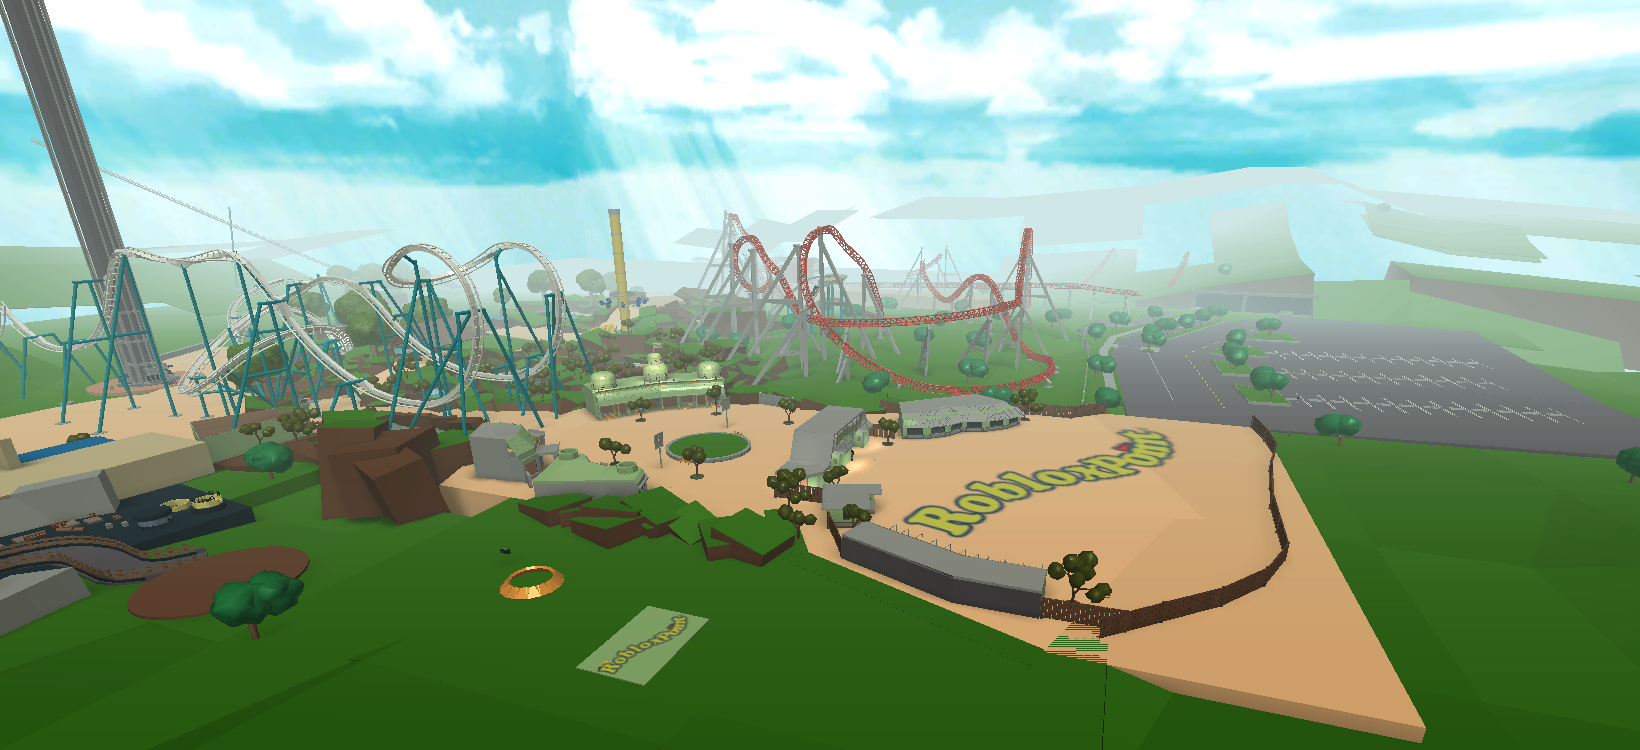 How to build a roller coaster in roblox studio